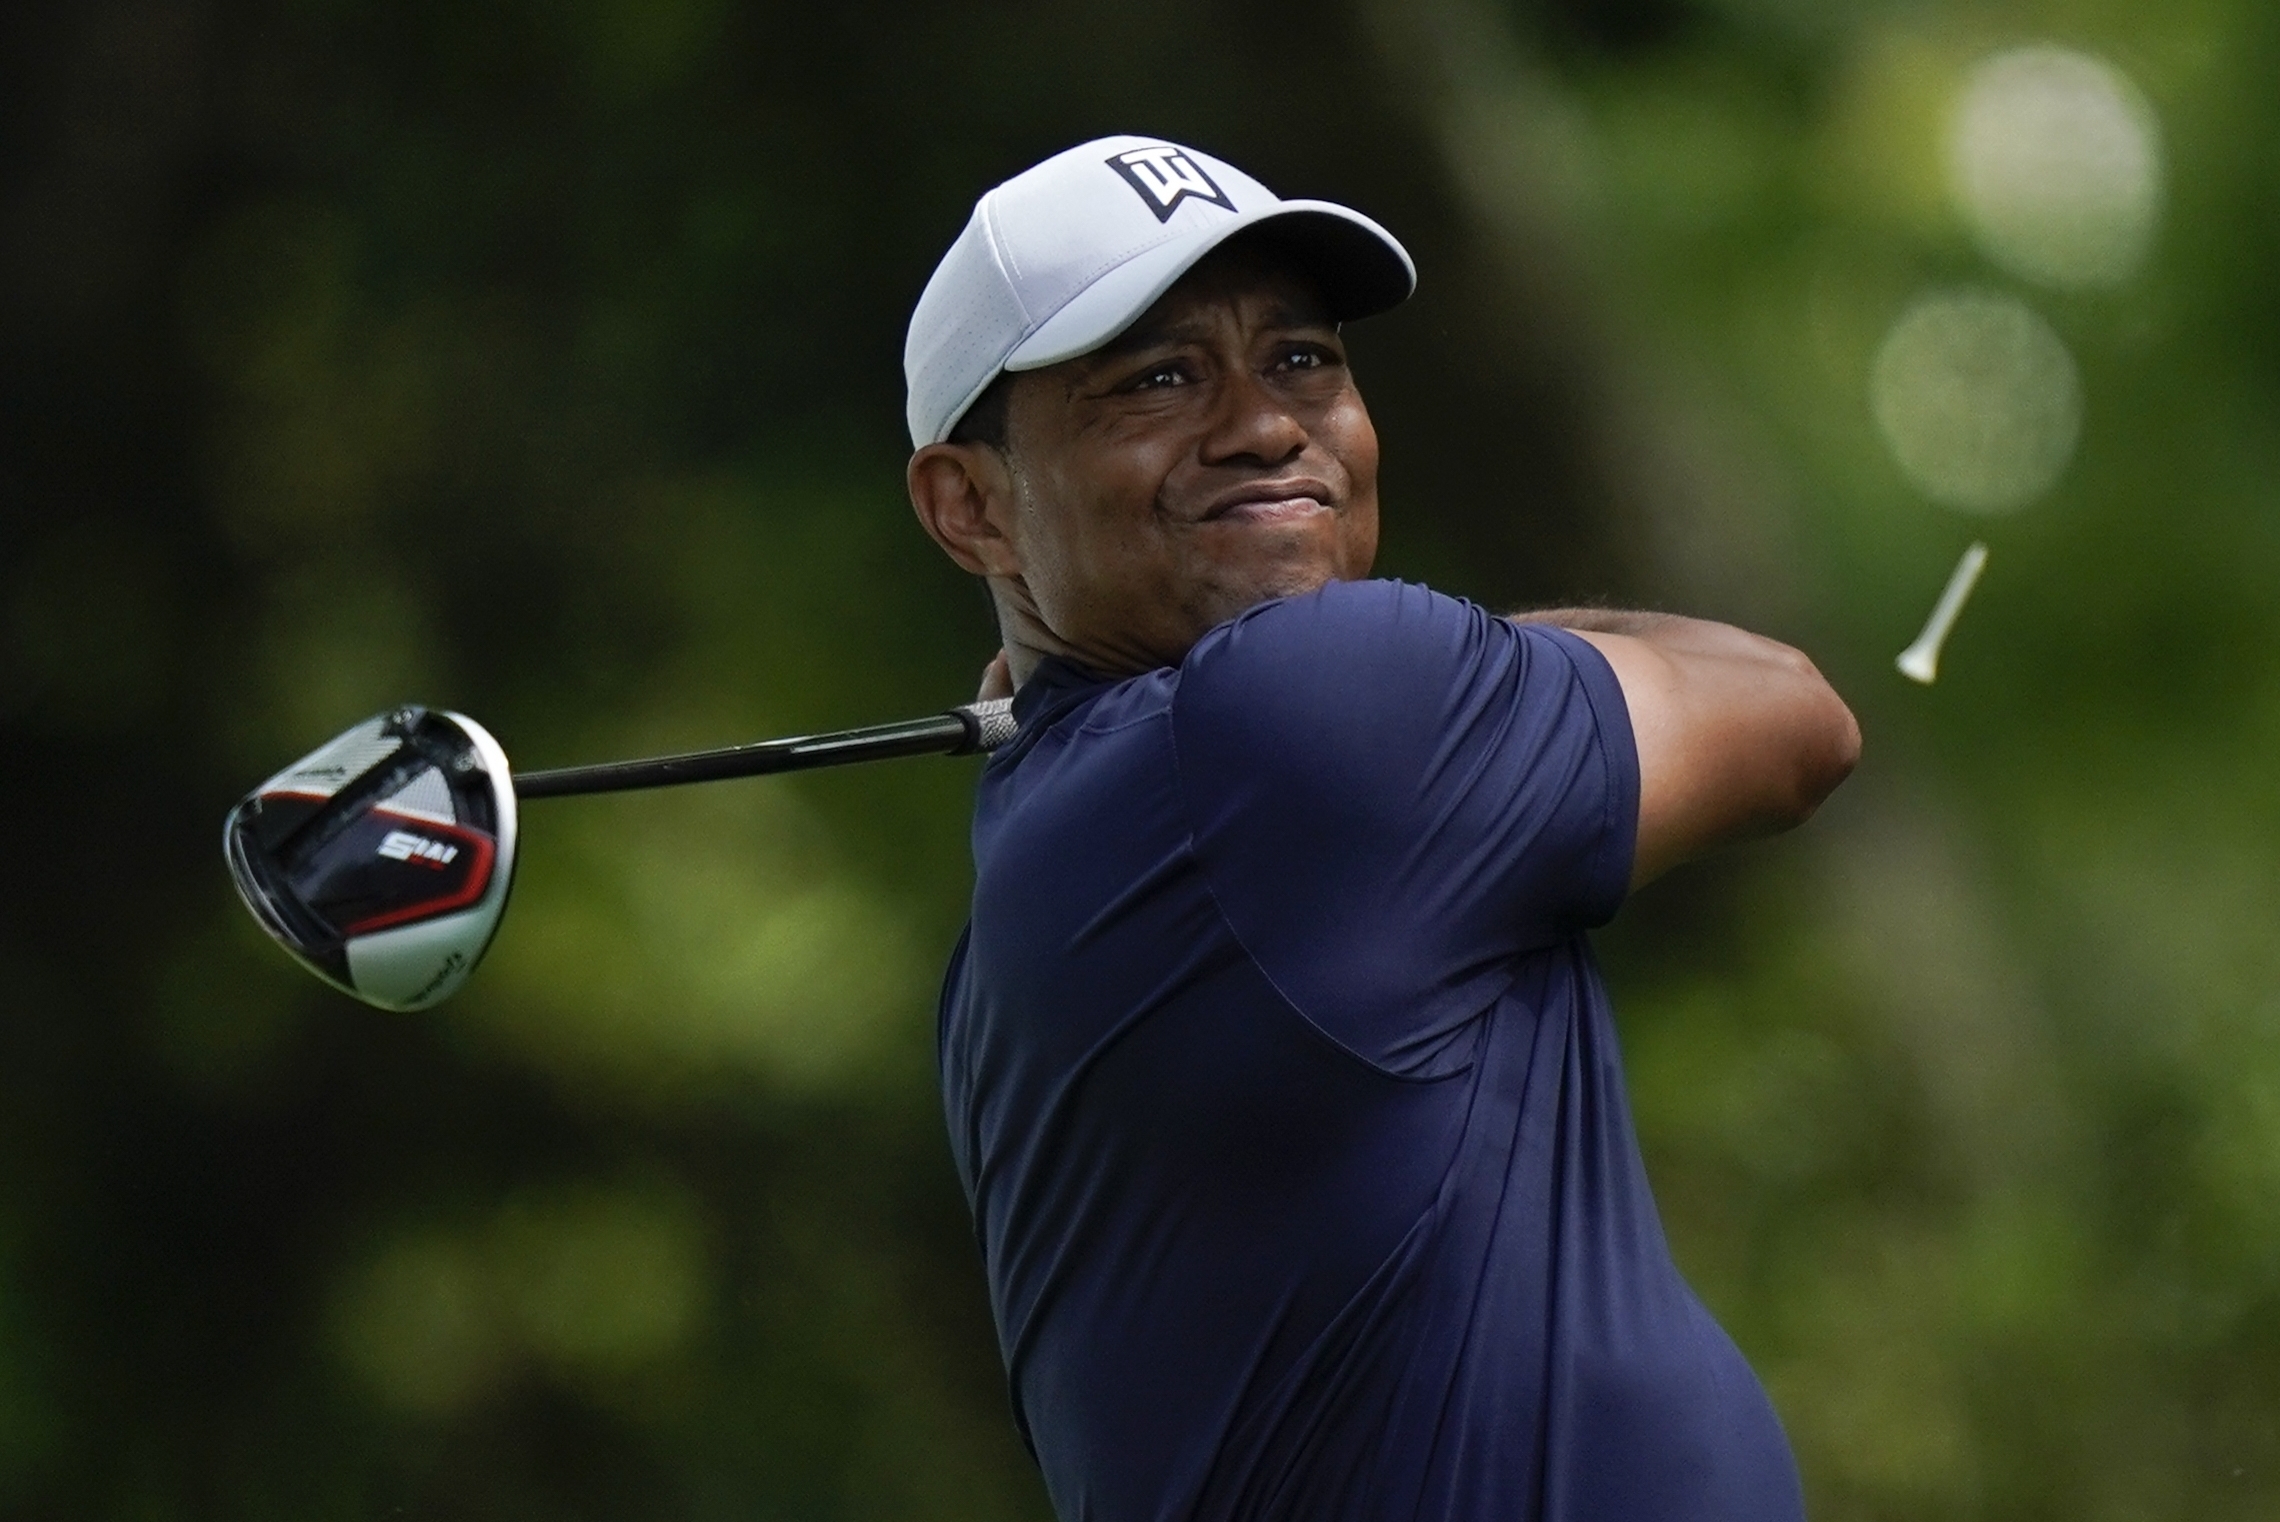 Tiger Woods To Play In Zozo Championship Pga Tour S 1st Ever Event In Japan Bleacher Report Latest News Videos And Highlights